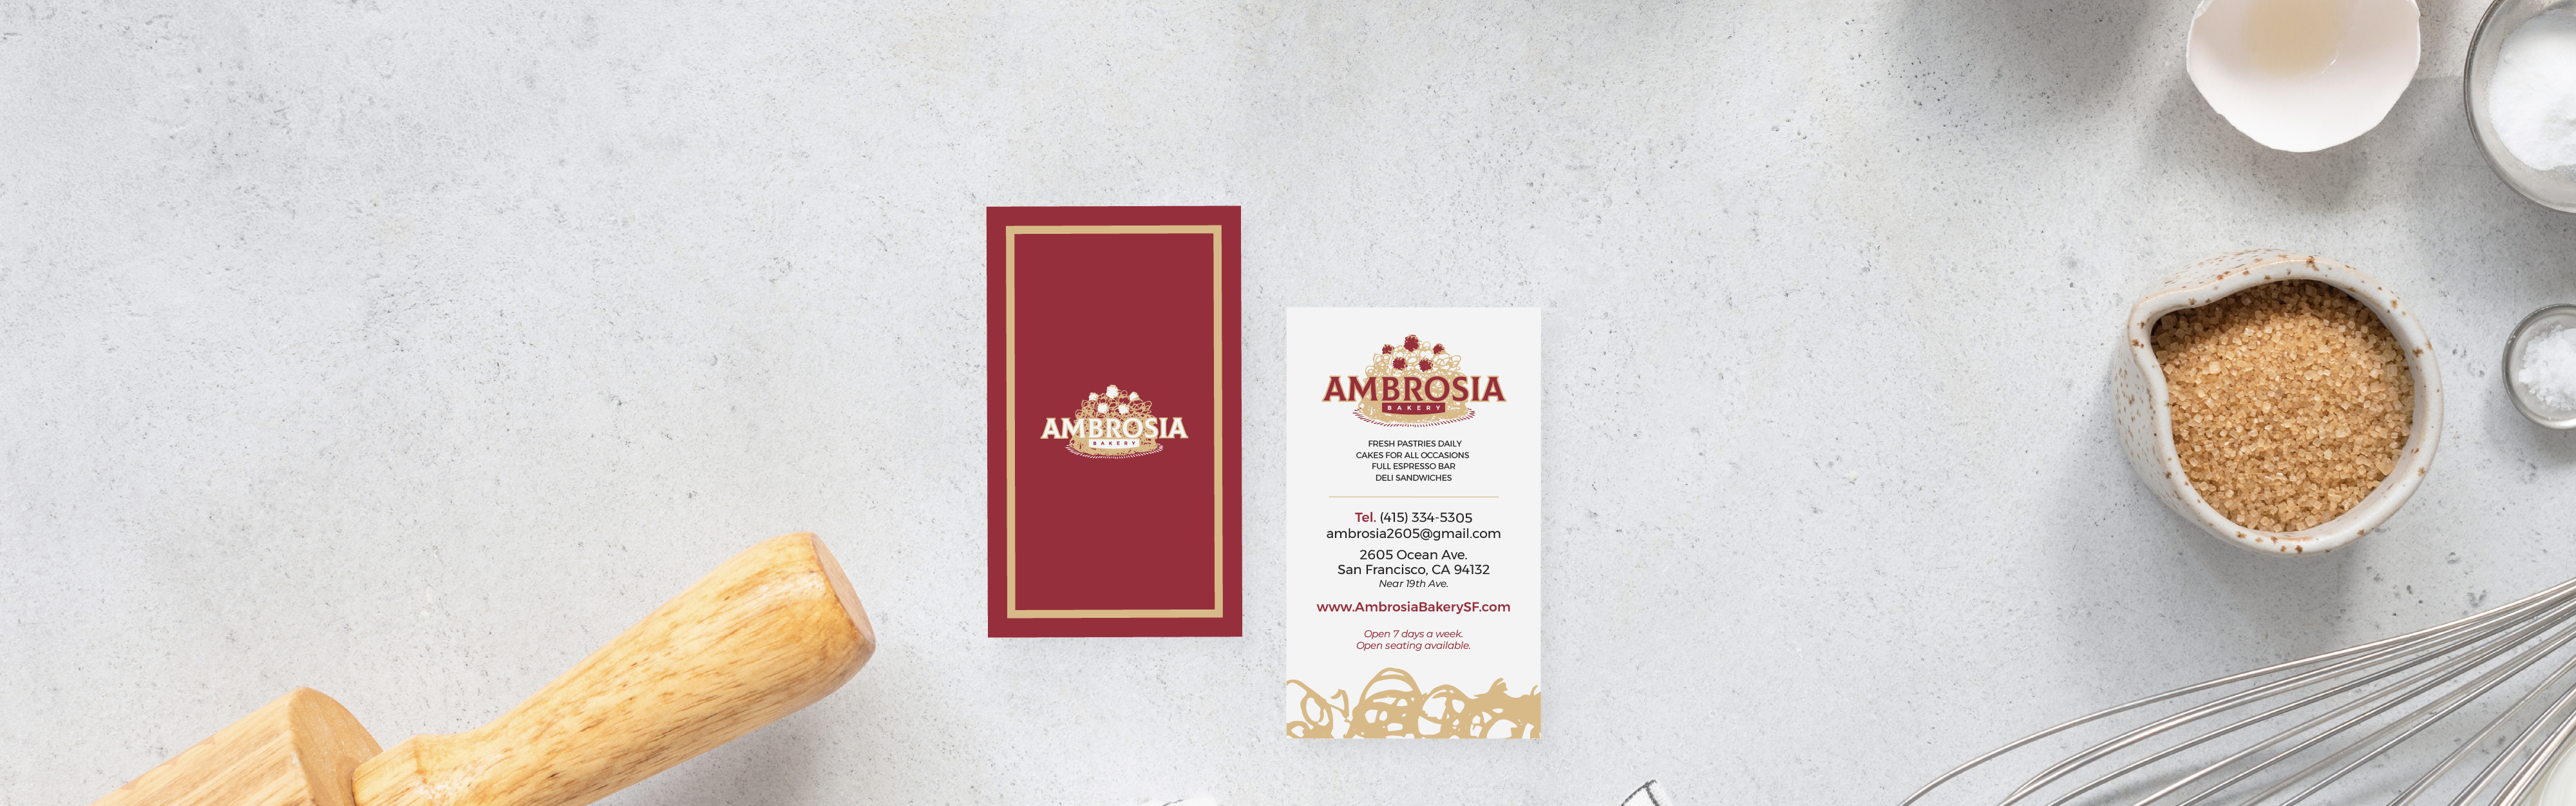 A flat lay of Ambrosia Bakery's branding materials including a menu and a business card, displayed on a concrete surface alongside a rolling pin, whisk, bowl, and a small dish of brown sugar